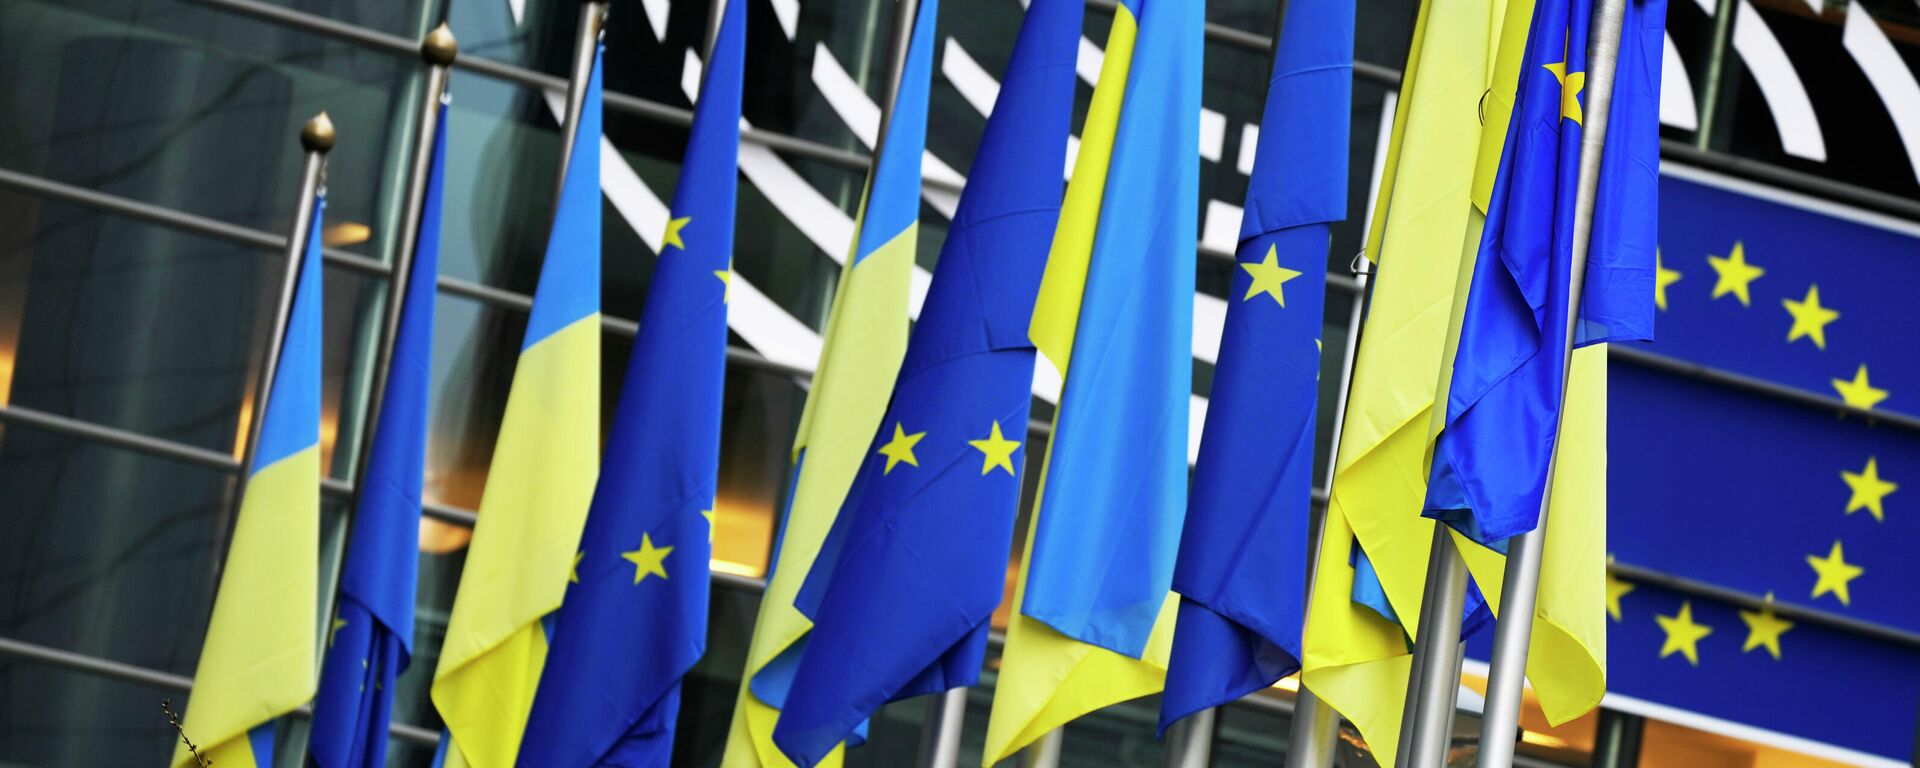 Ukraine and European Union flags hang together on the exterior of the building at the European Parliament in Brussels, Tuesday, March 1, 2022 - Sputnik International, 1920, 03.10.2023